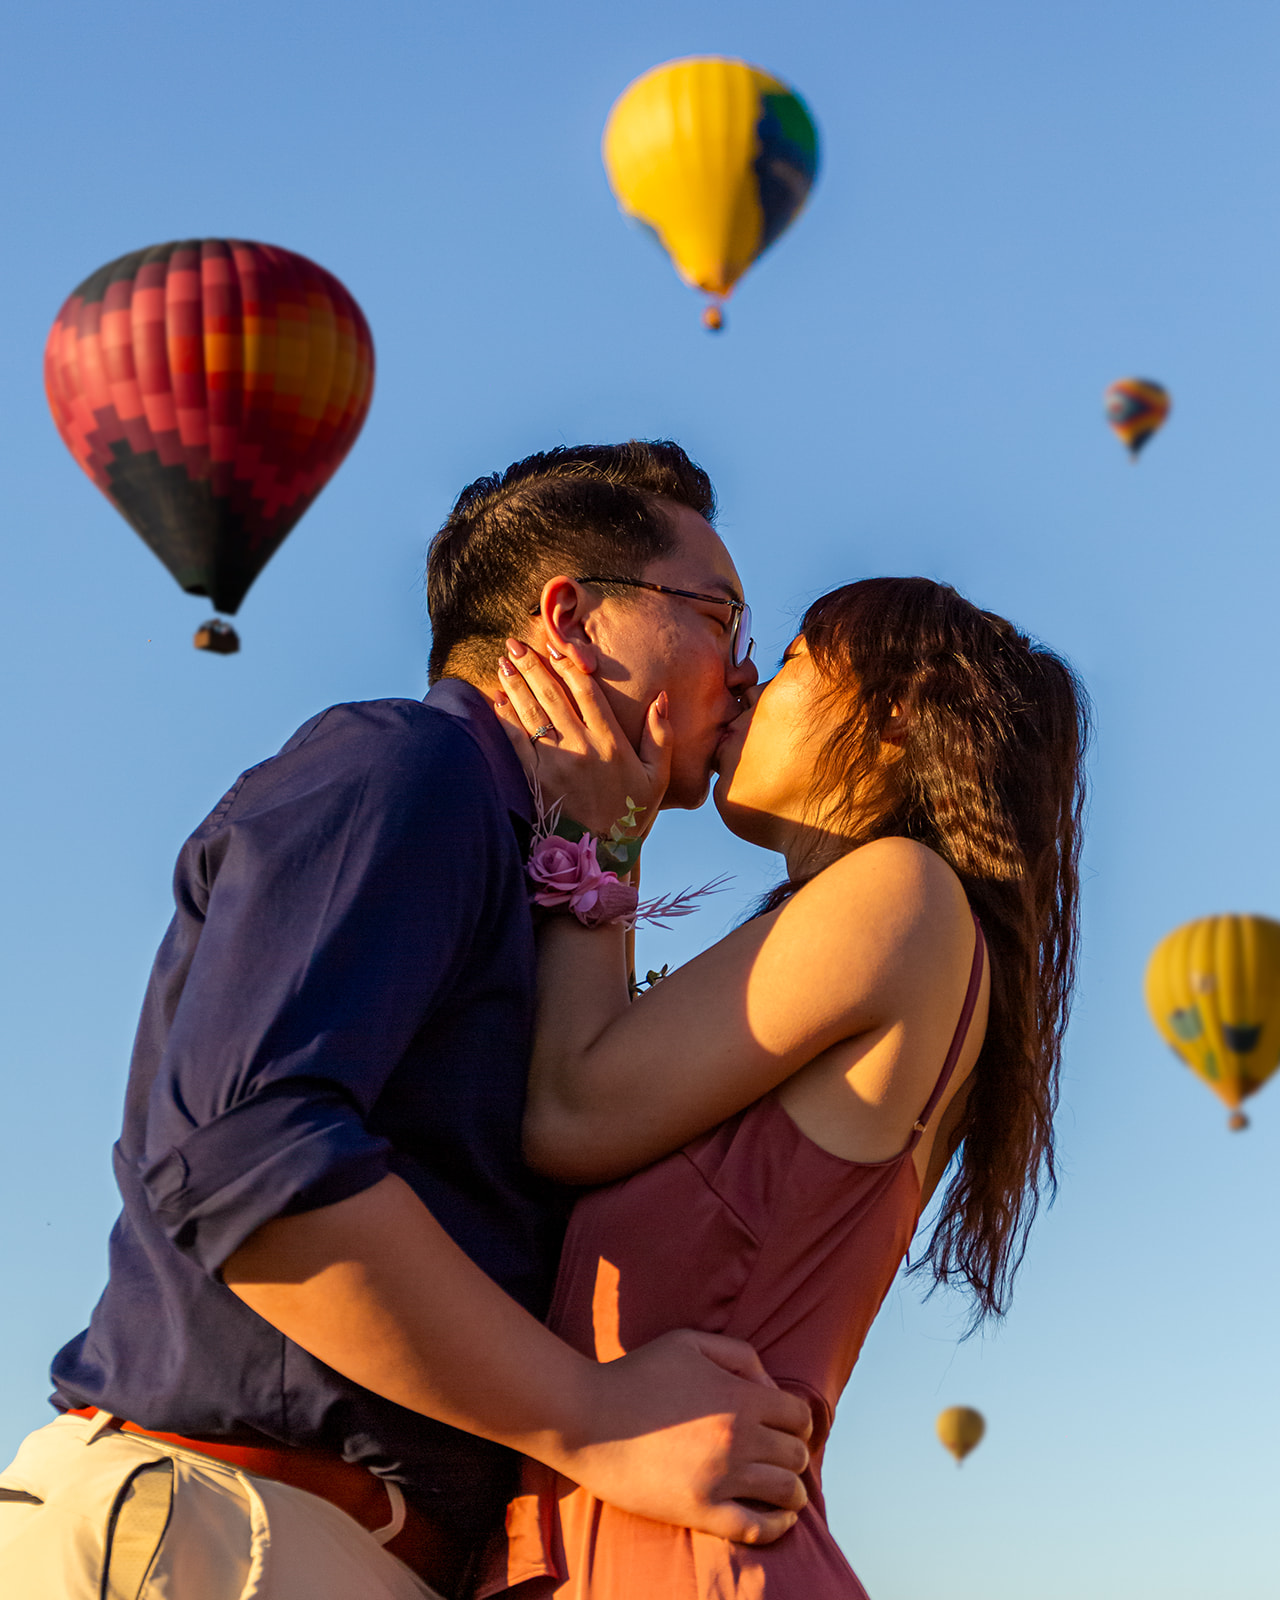 nonbinary person and their girlfriend kissing in front of colorful hot air balloons